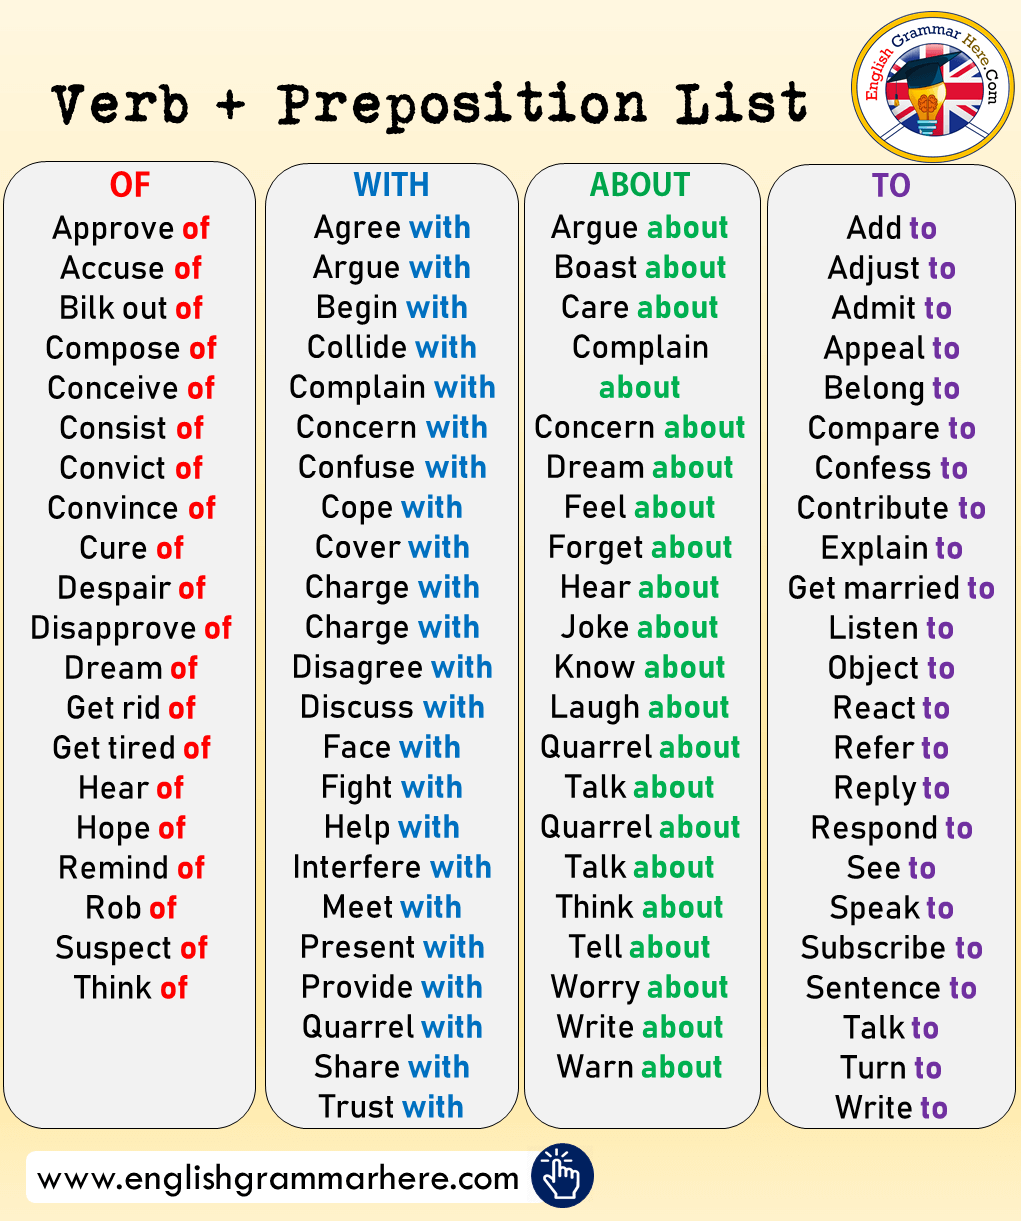 Verb + Preposition List, Verb + in, Verb + at, Verb + on, Verb + from, Verb + of, Verb + to, Verb + about, Verb + with